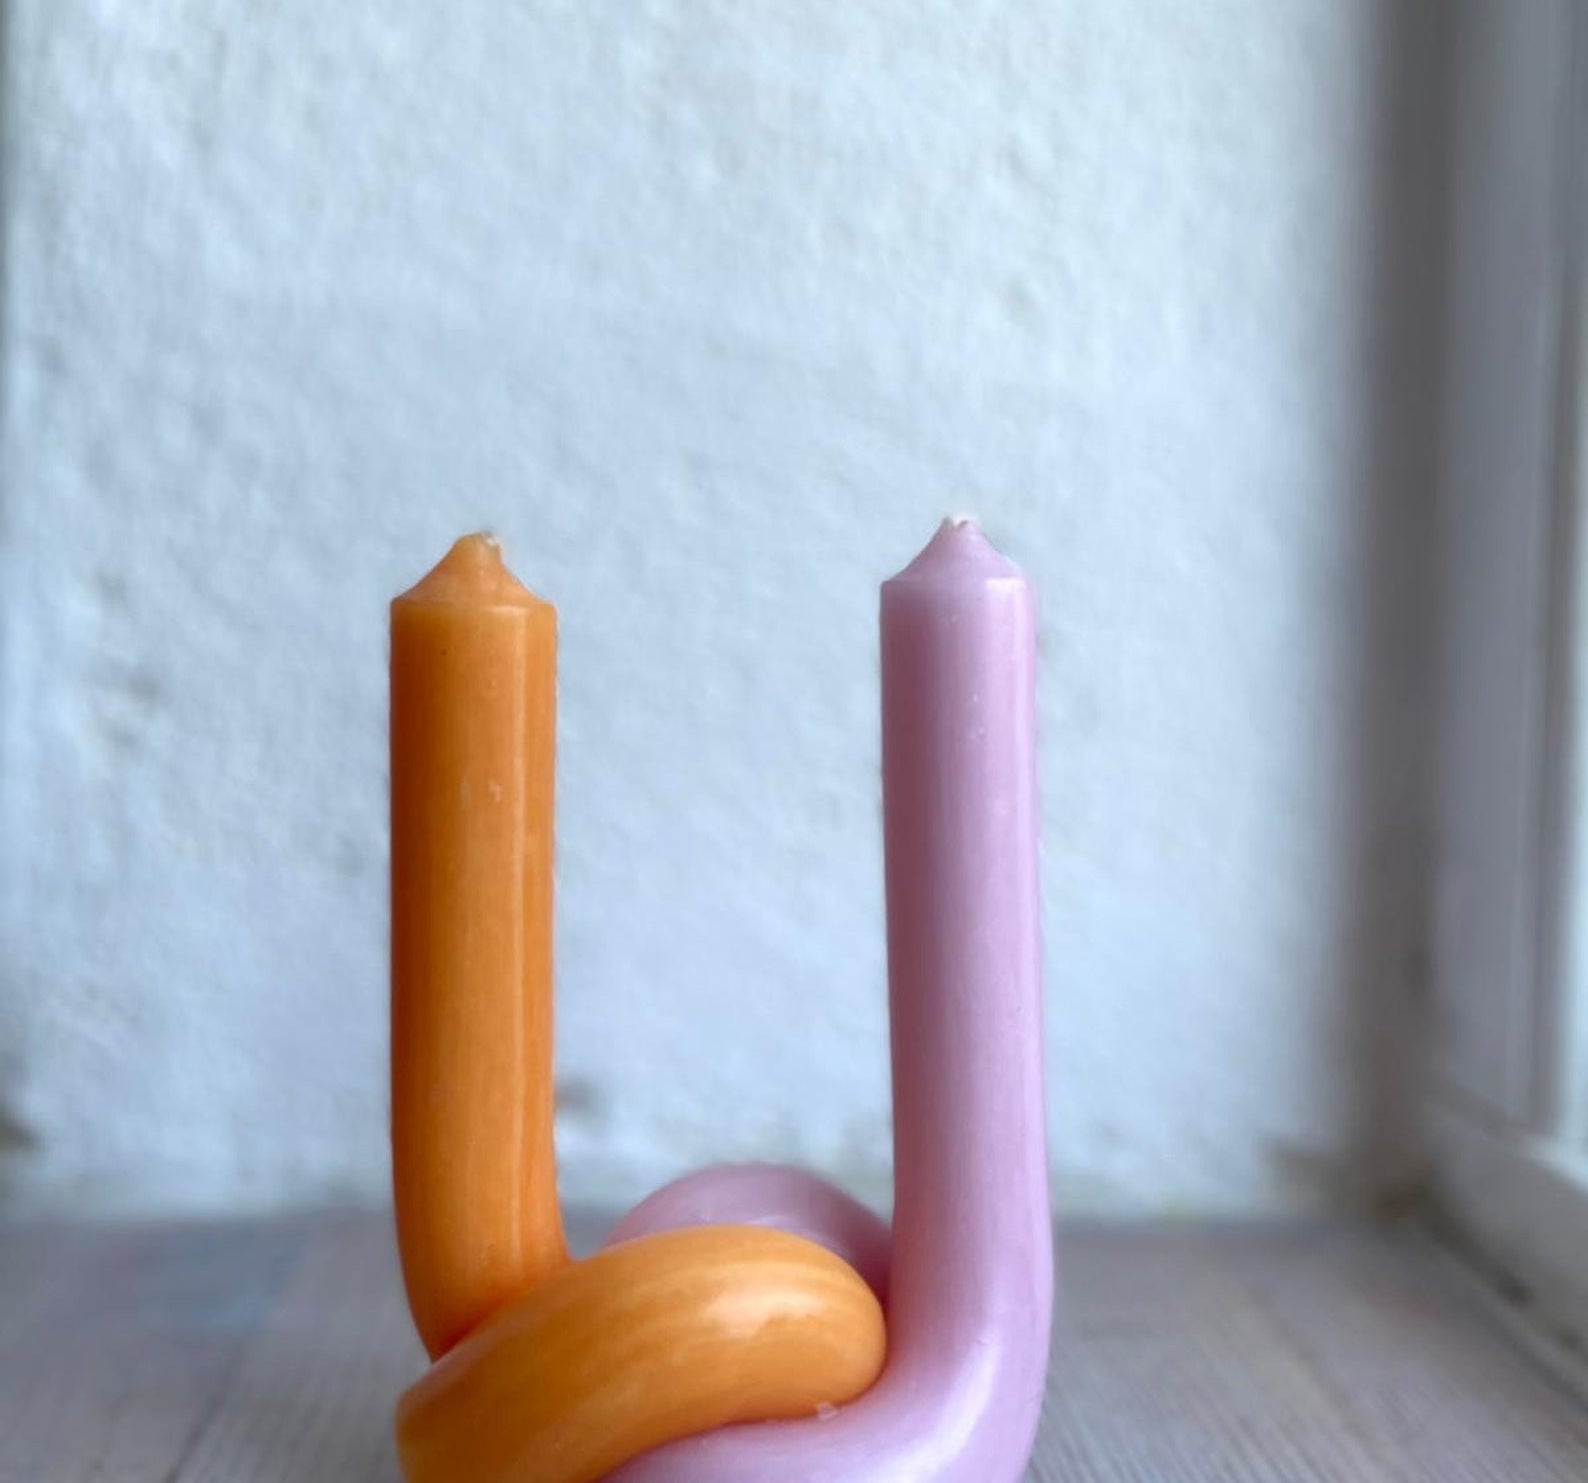 one orange and one pink candle stick twisted together at the base